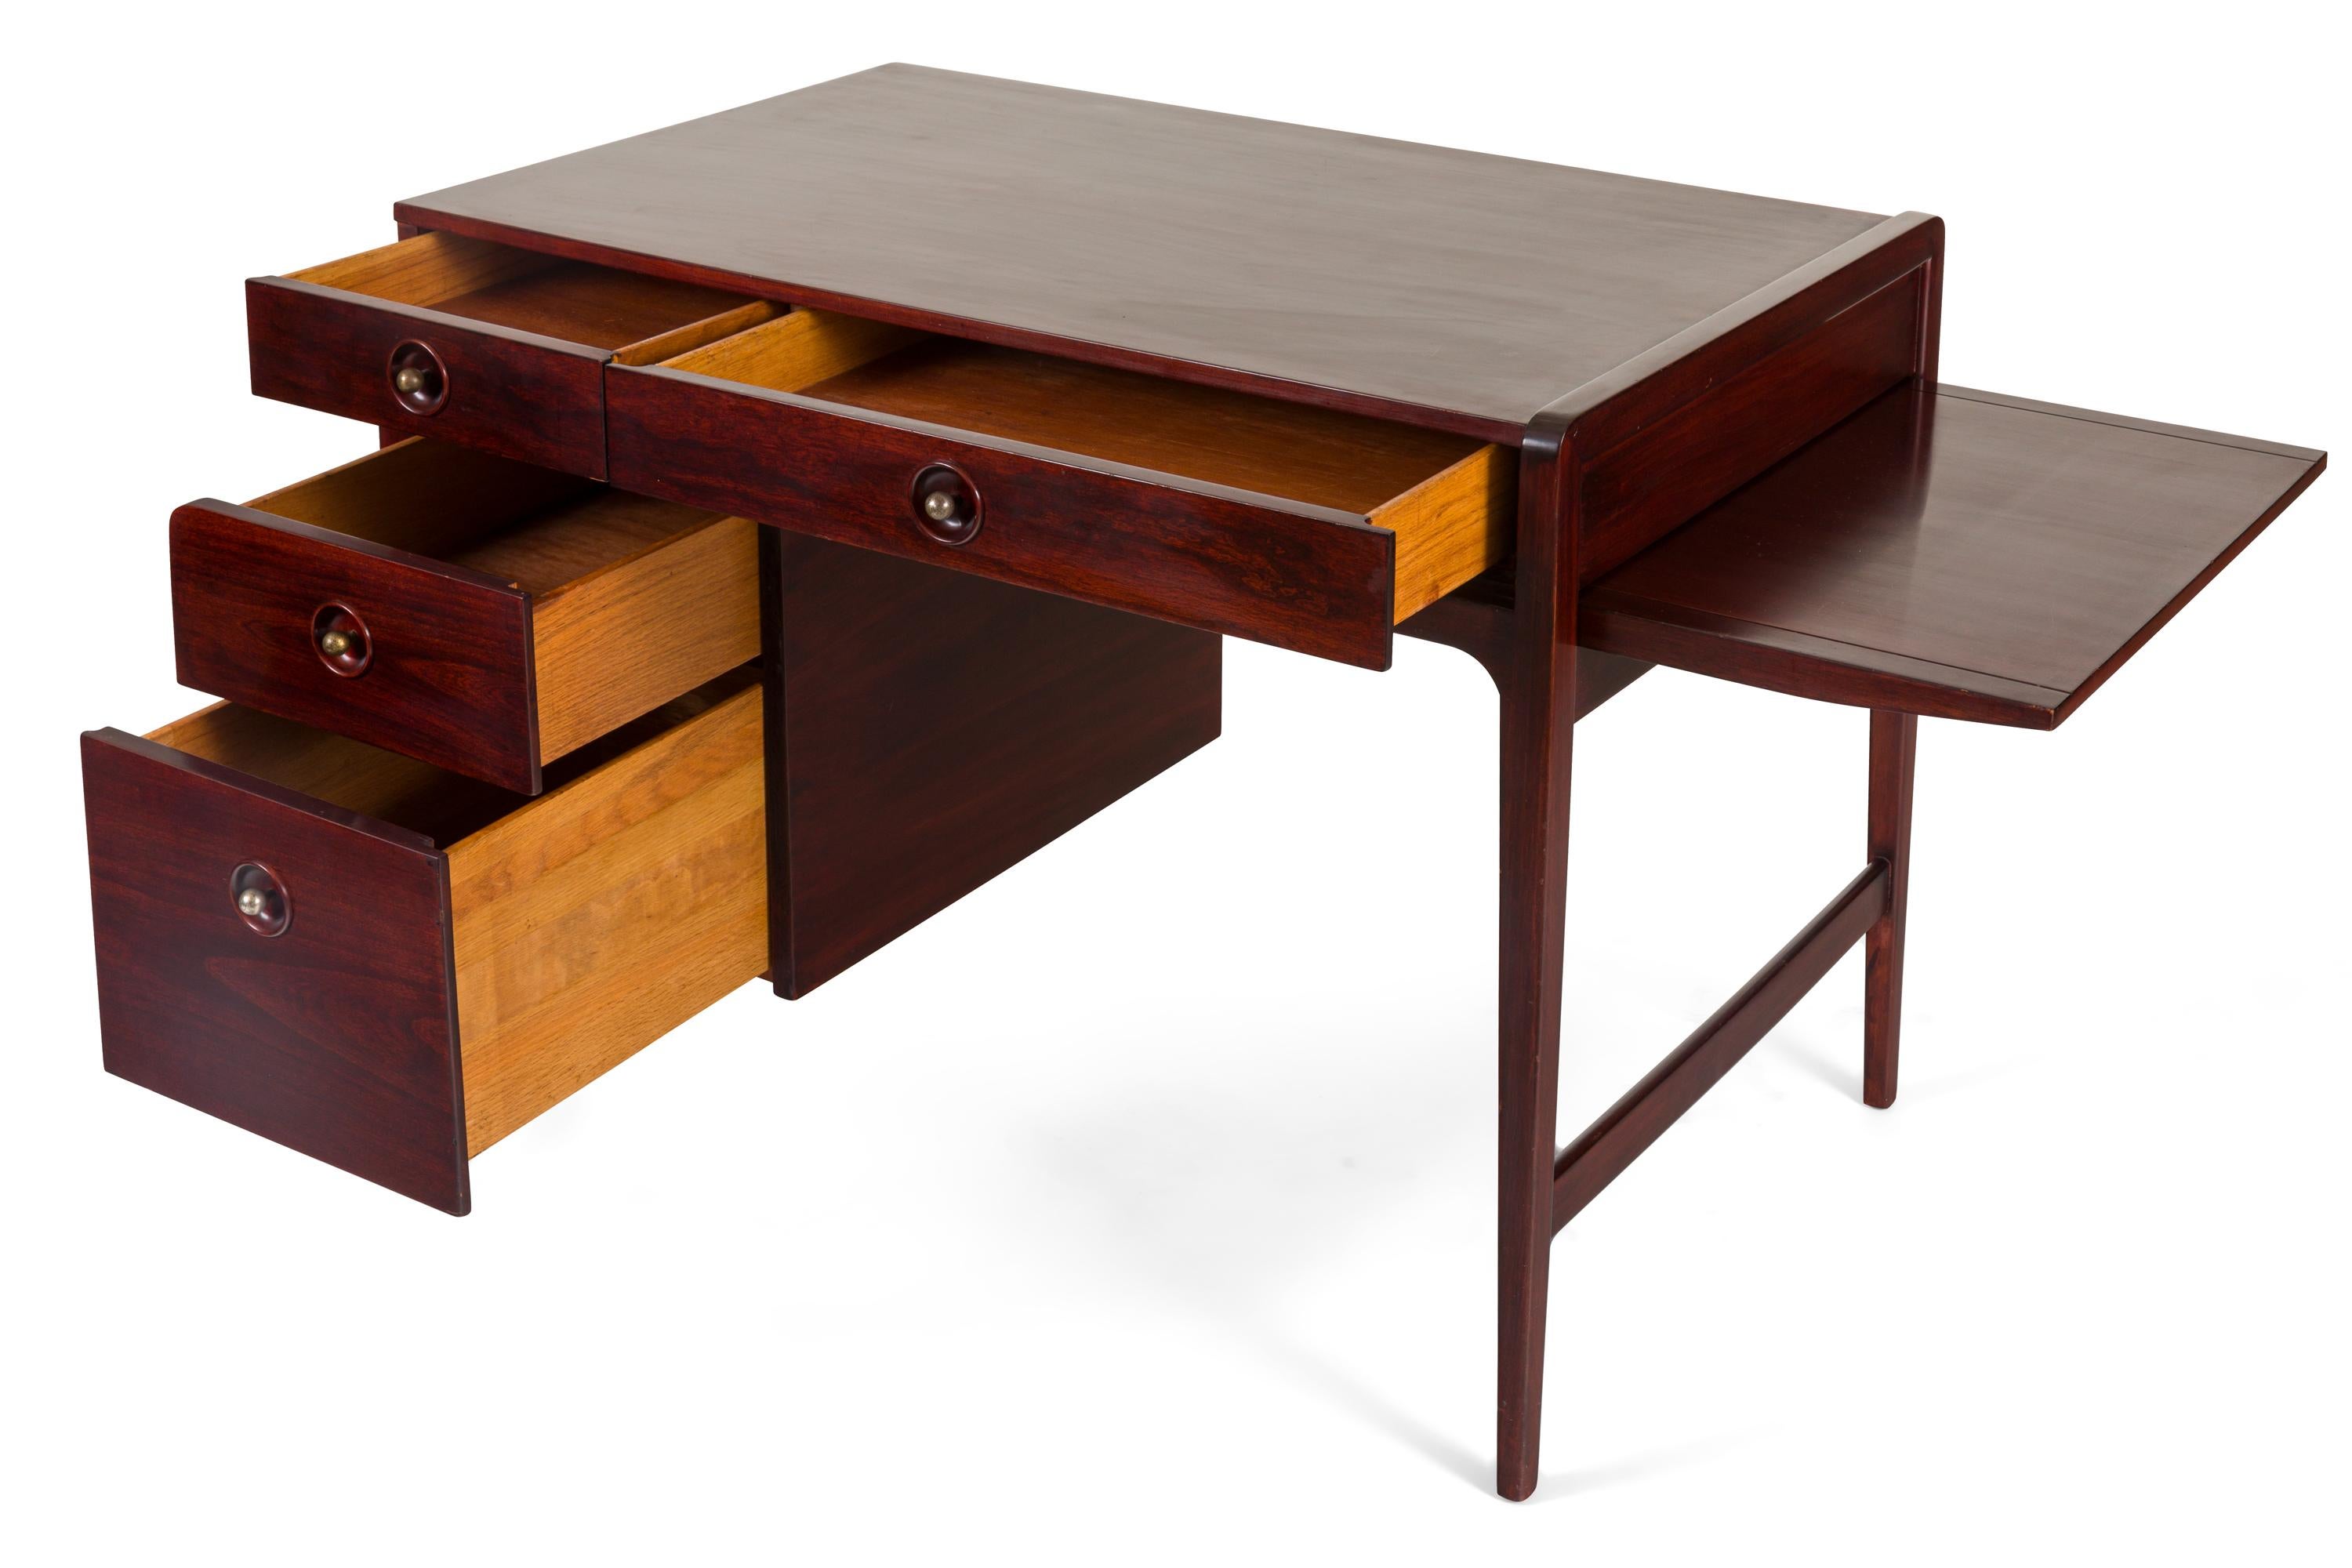 A classic early mid-century design. The small size along with the extending side surface makes this a practical as well as great looking desk.